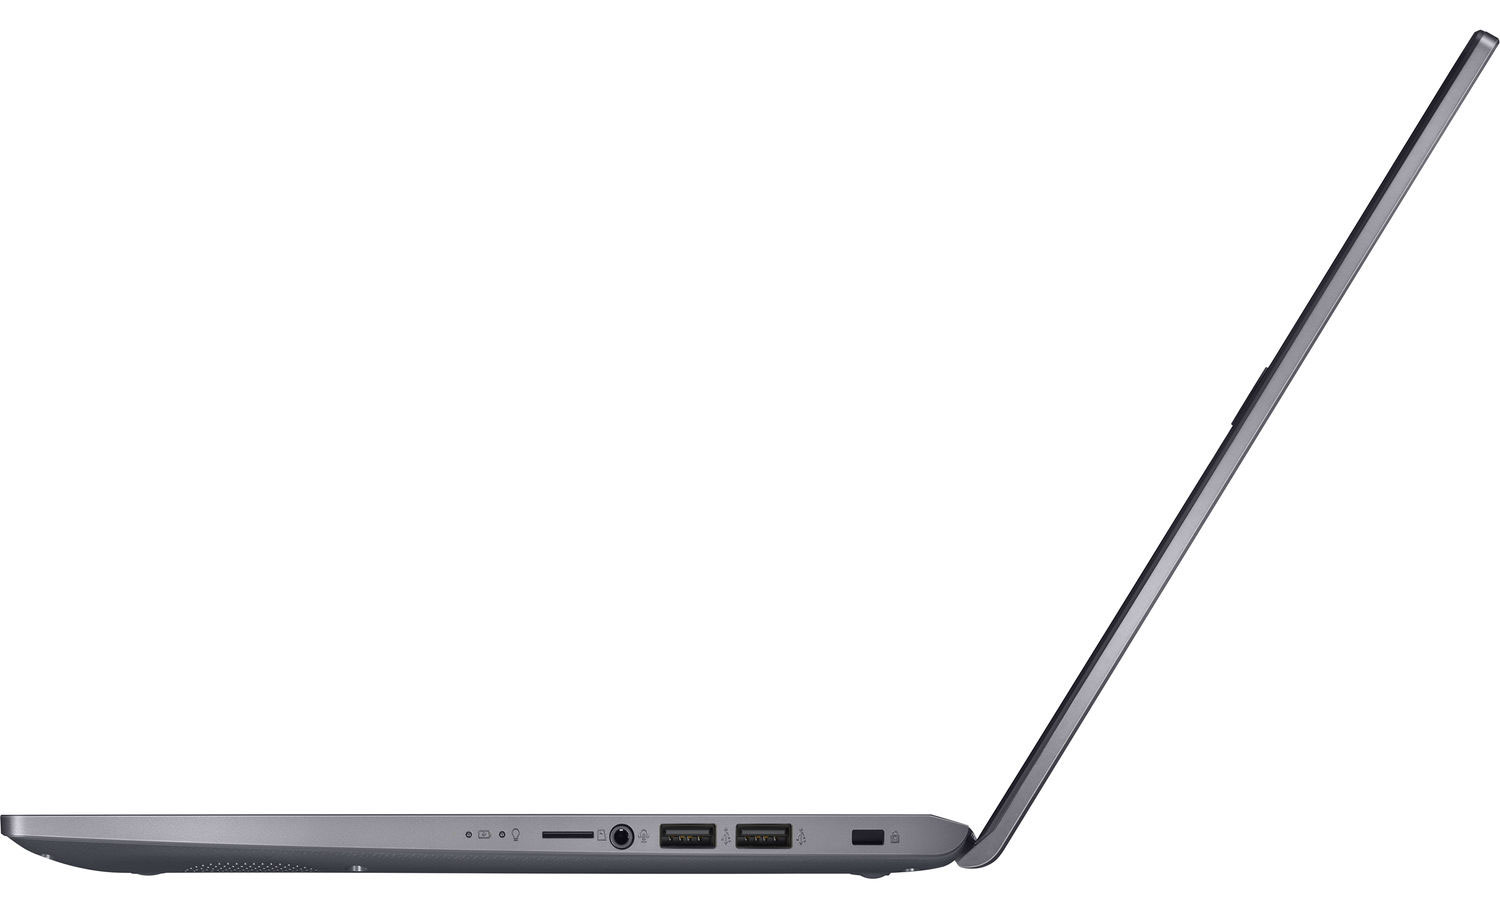 ASUS X509FA 10th Gen Core i3 Laptop With 8GB RAM & 1TB SSD